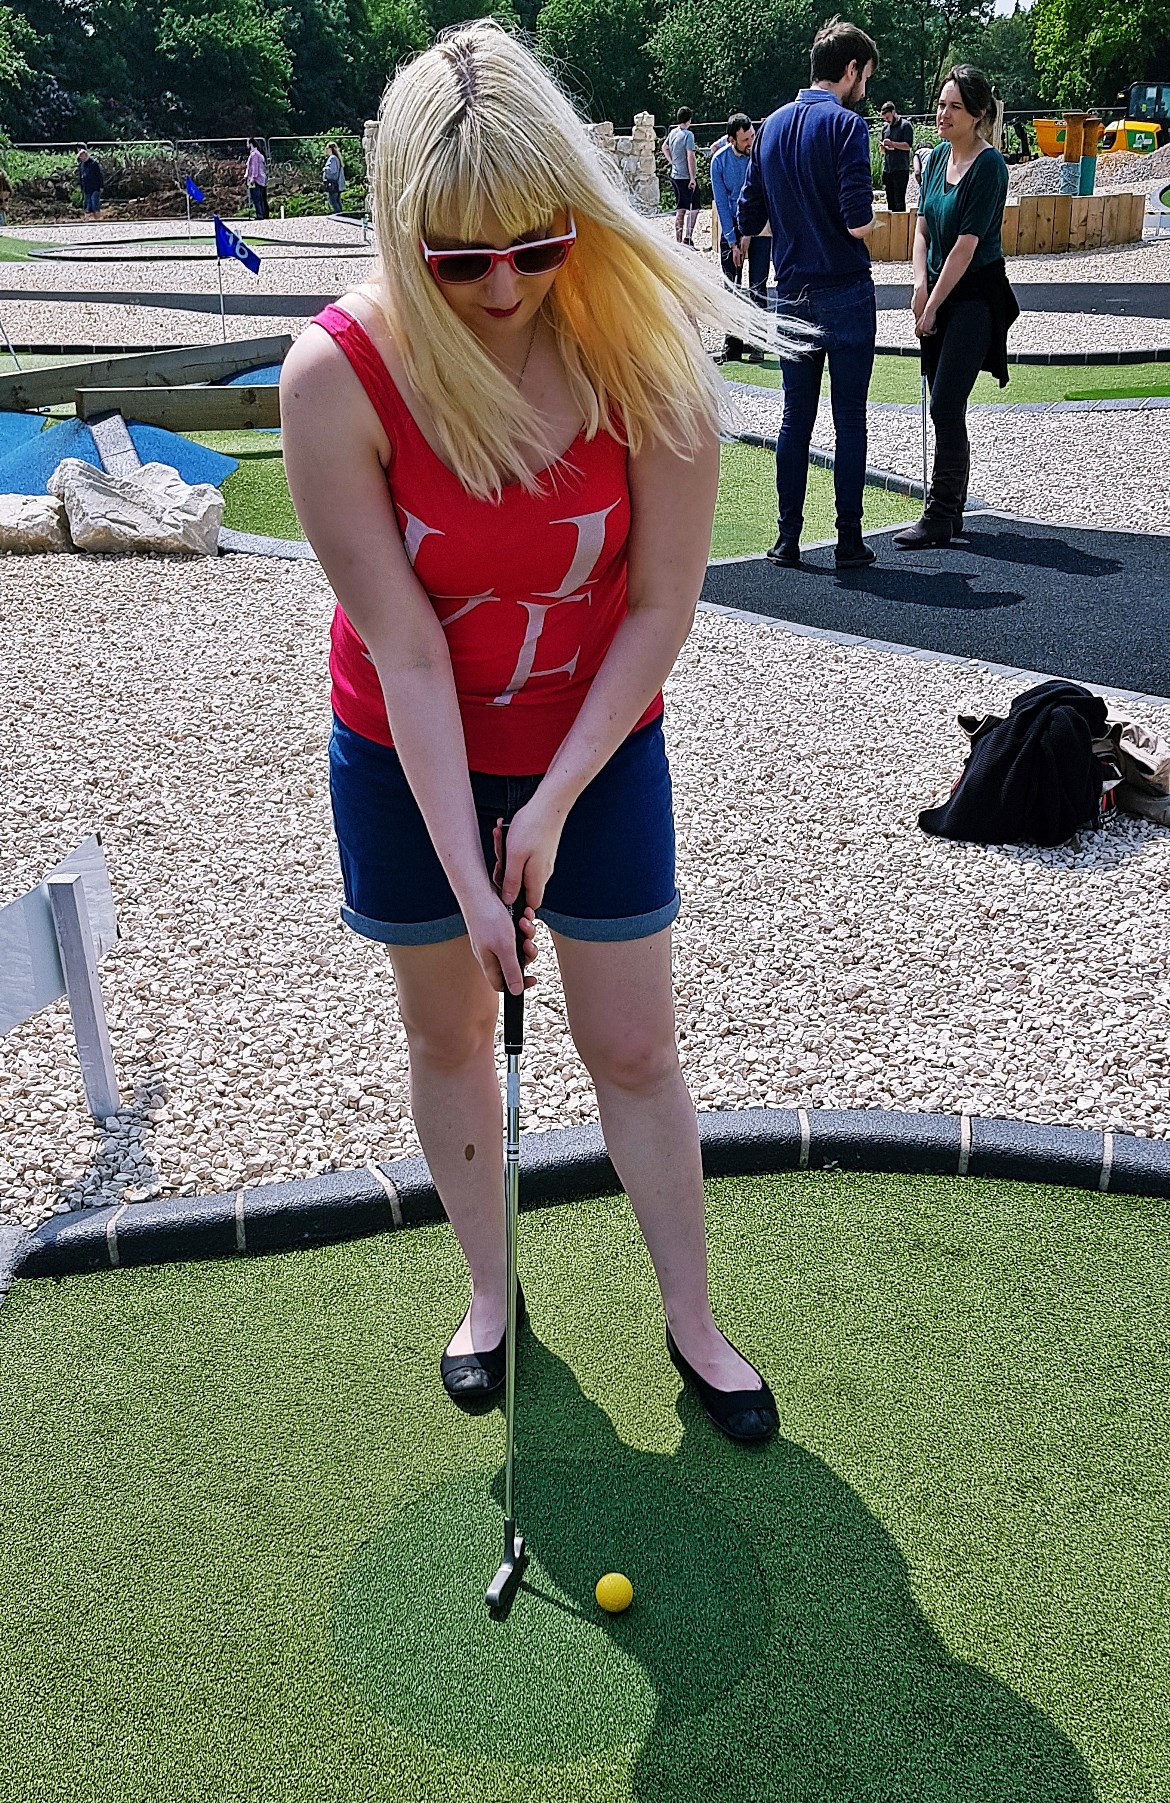 Mini golf in Nottingham - May 2018 Monthly Recap by BeckyBecky Blogs